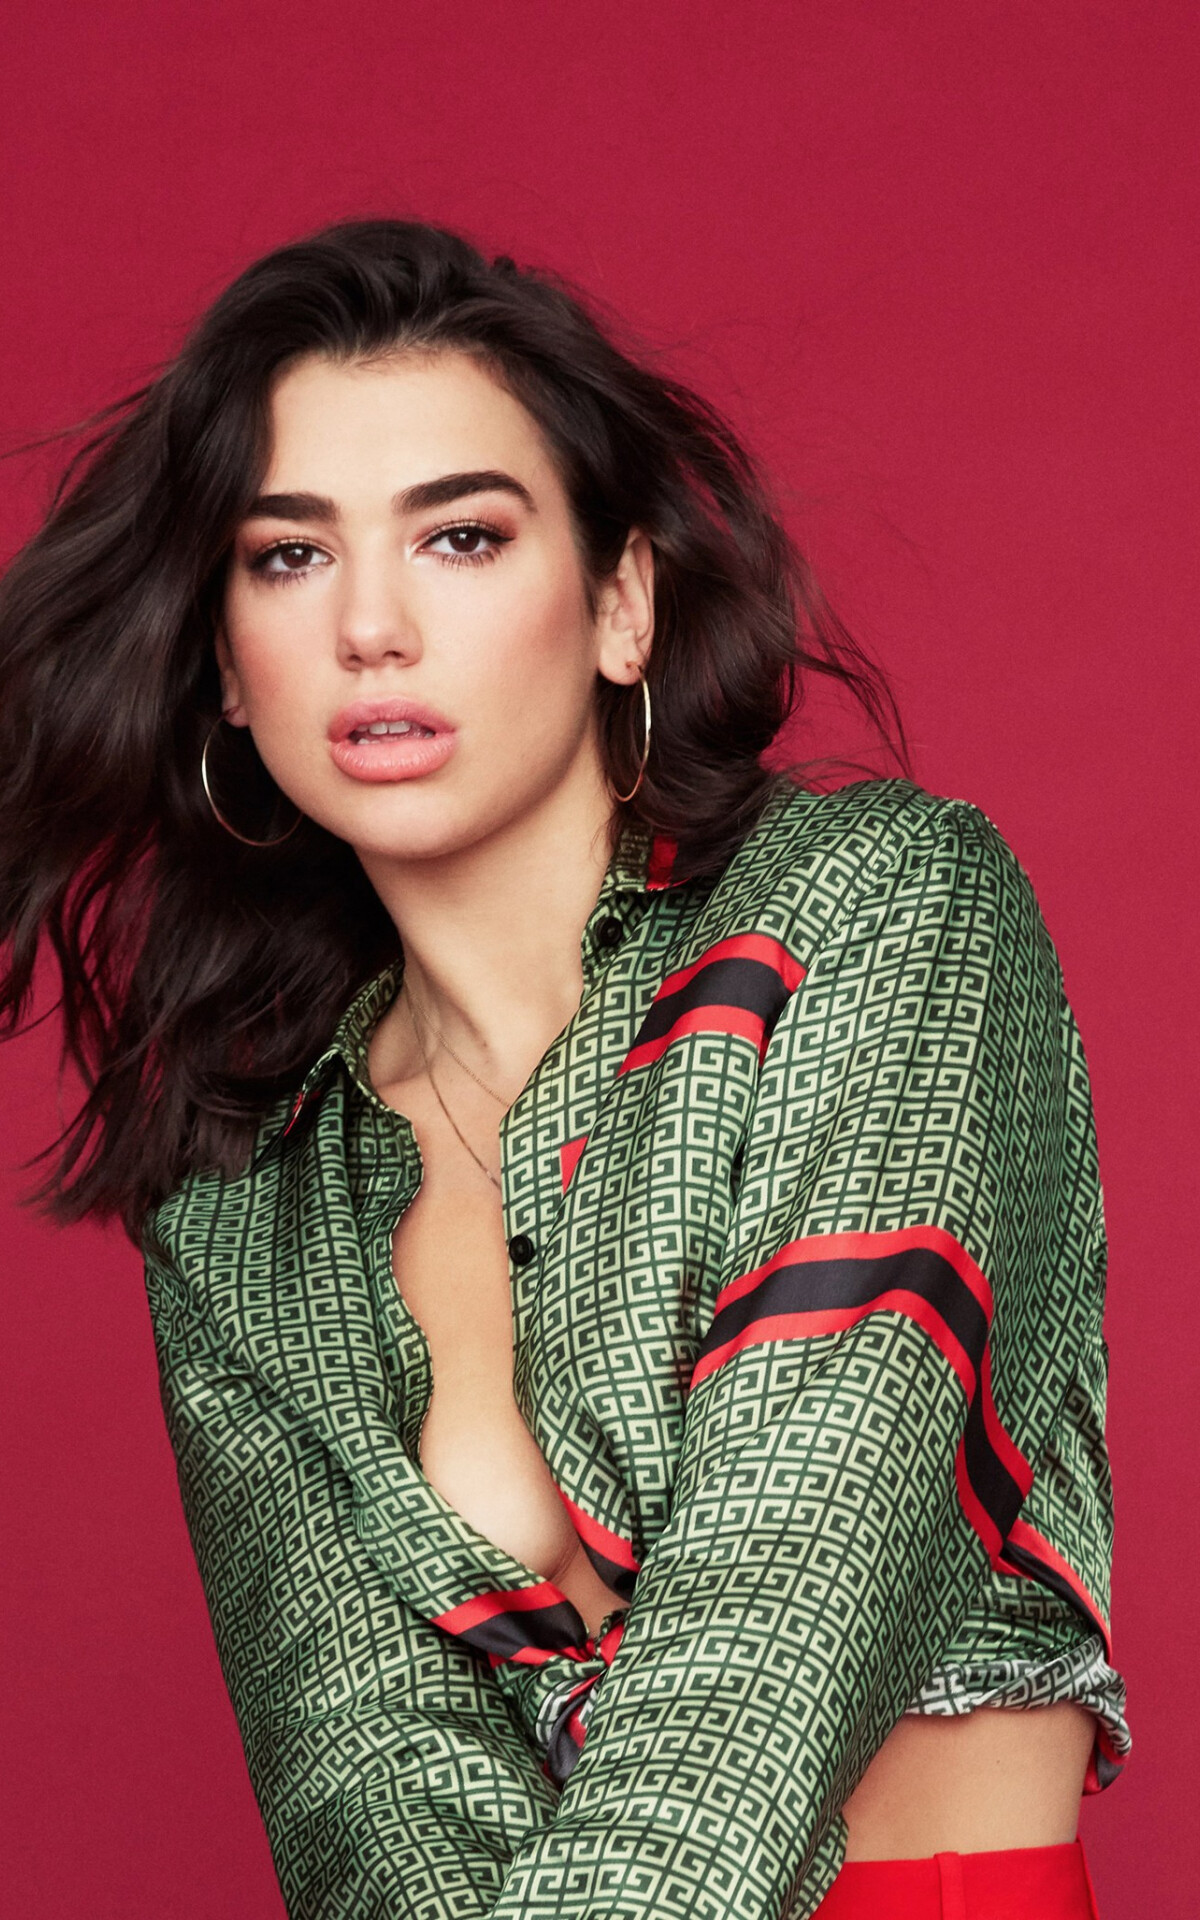 Dua Lipa: Released the single "One Kiss" with Calvin Harris on 6 April 2018. 1200x1920 HD Background.